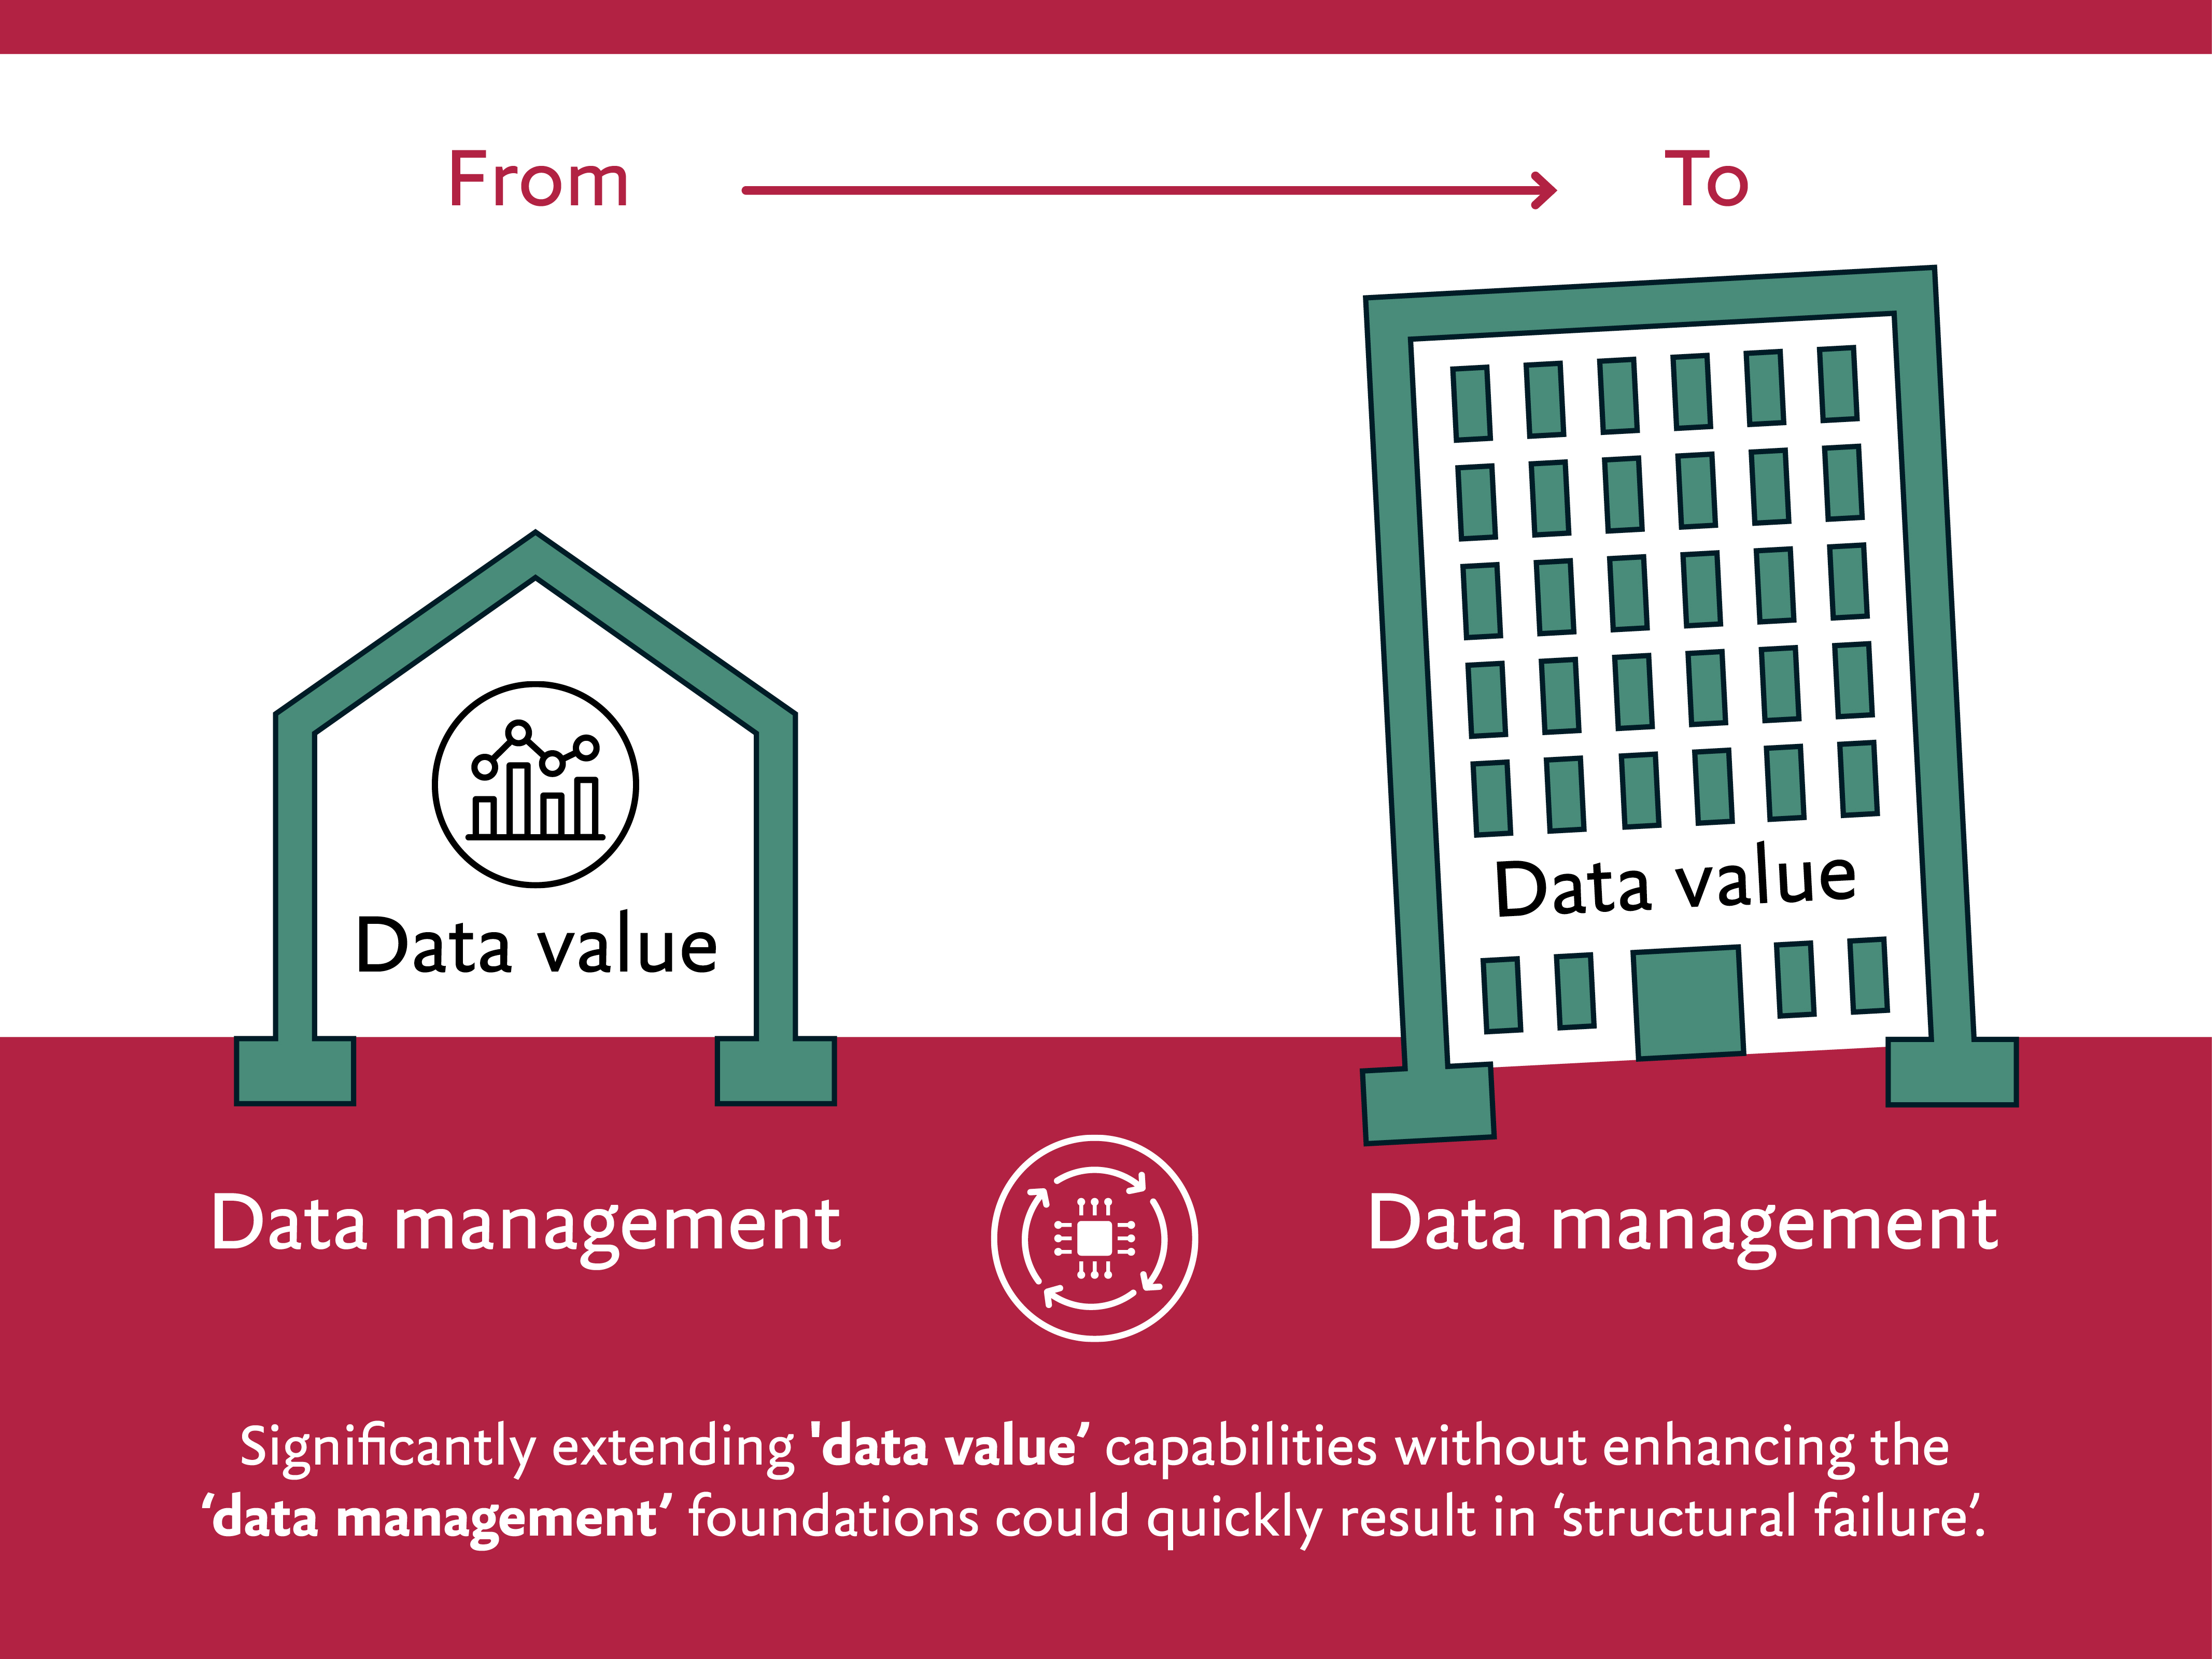 Significantly extending data value capabilities without enhancing the data management foundations could quickly result in structural failure.